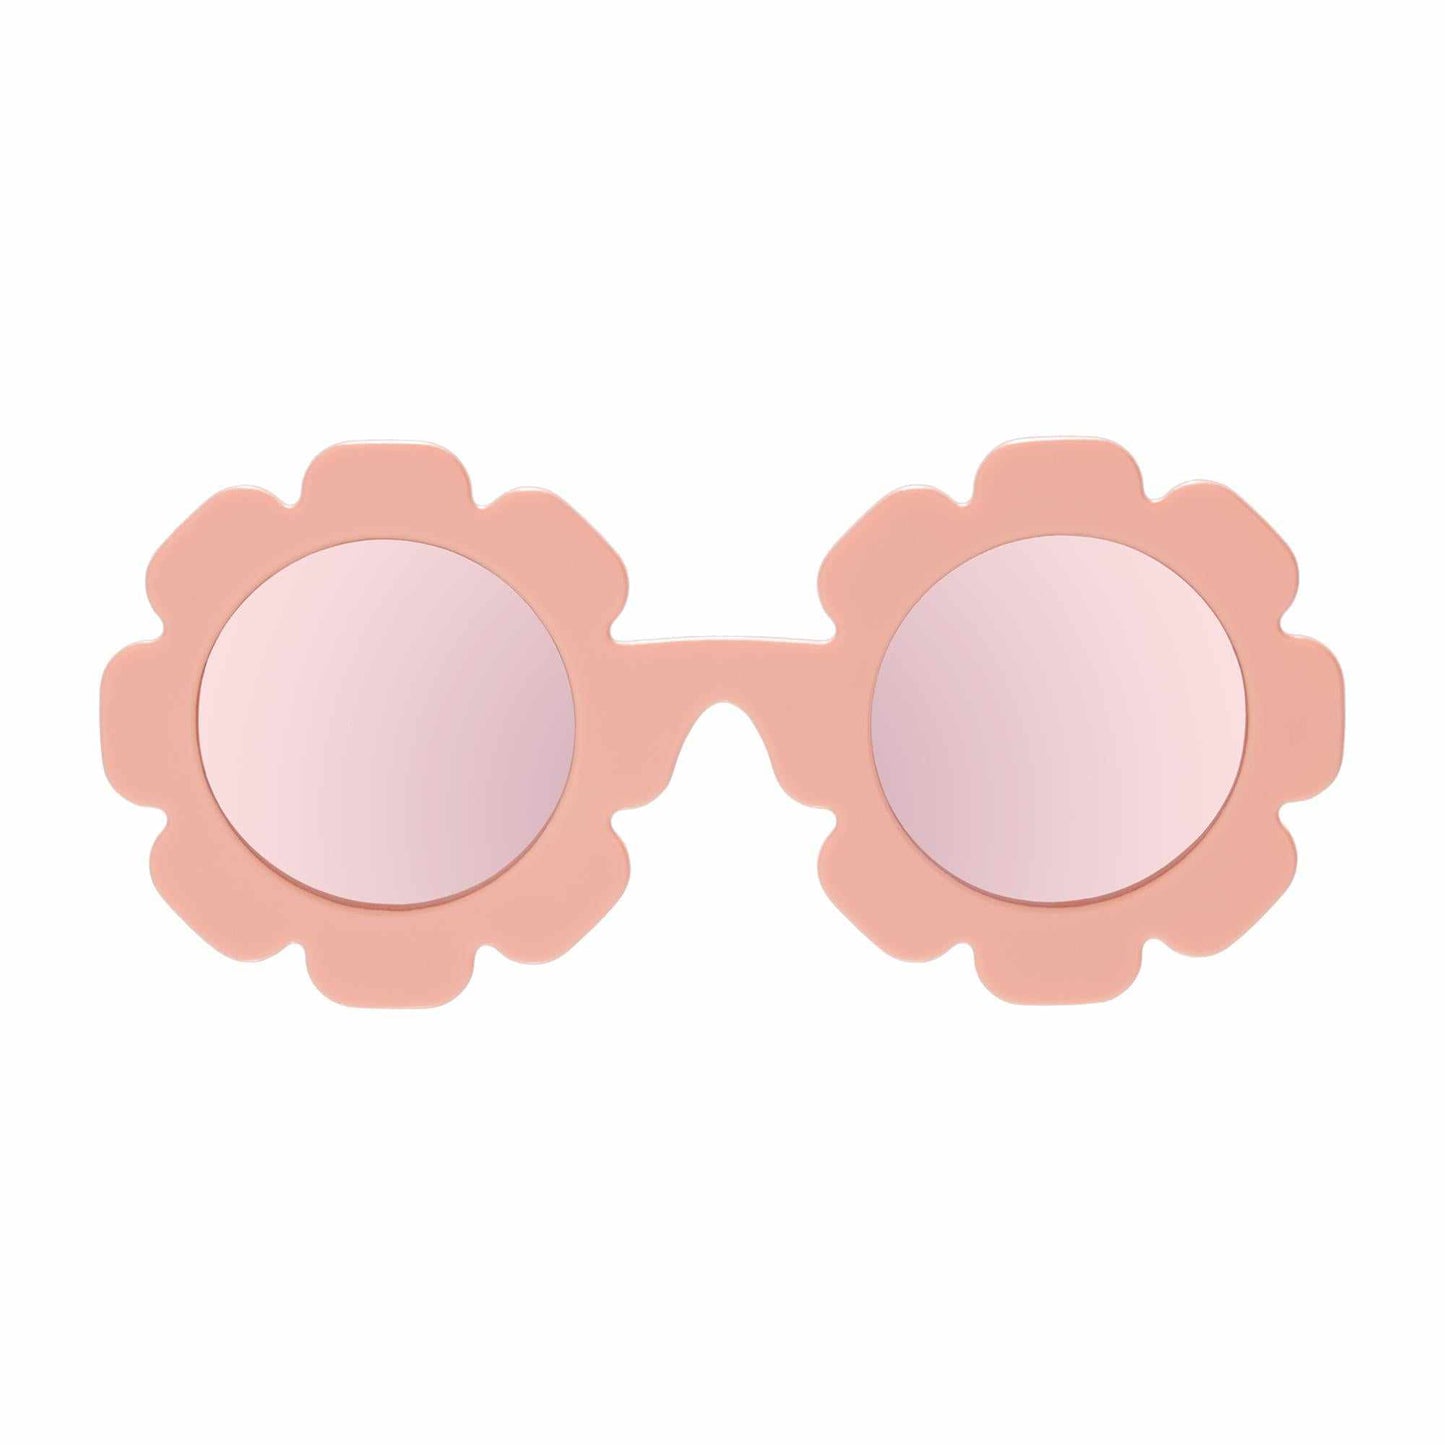 Limited Edition Non-polarized mirrored Sunglasses "The Flower Child"